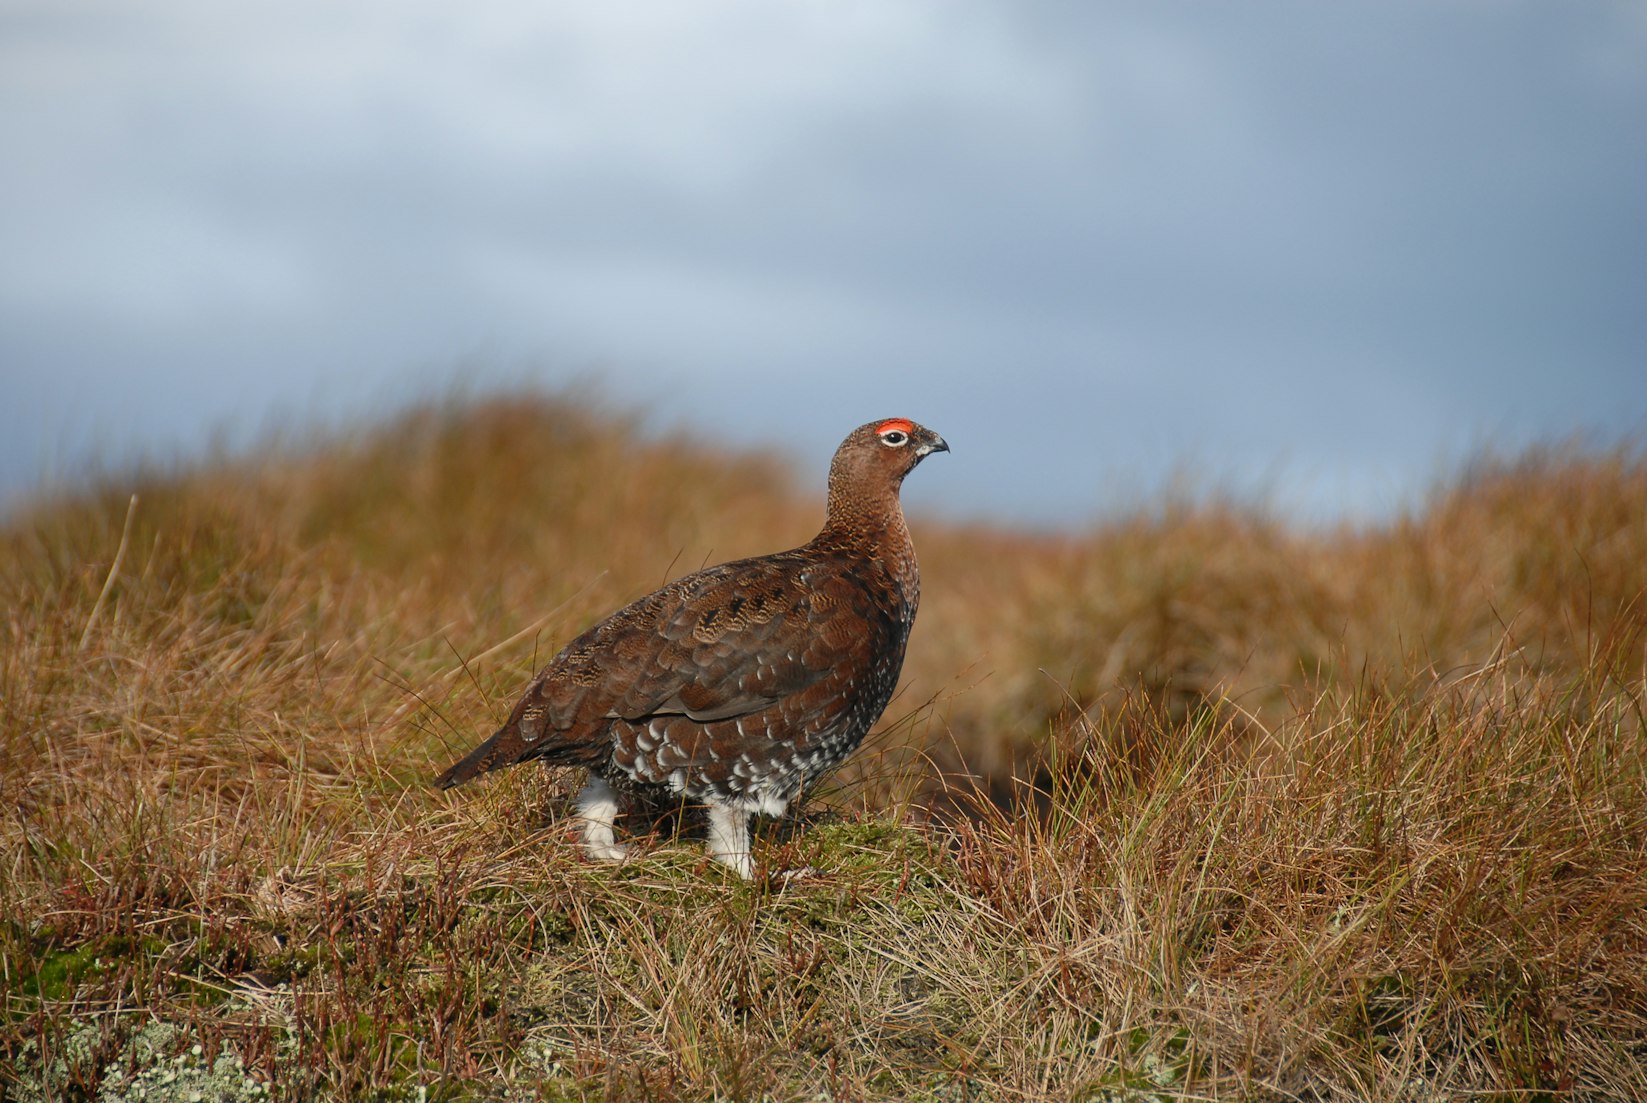 Preserving The Future of Grouse, Woodcock and Hunting – Ruffed Grouse Society